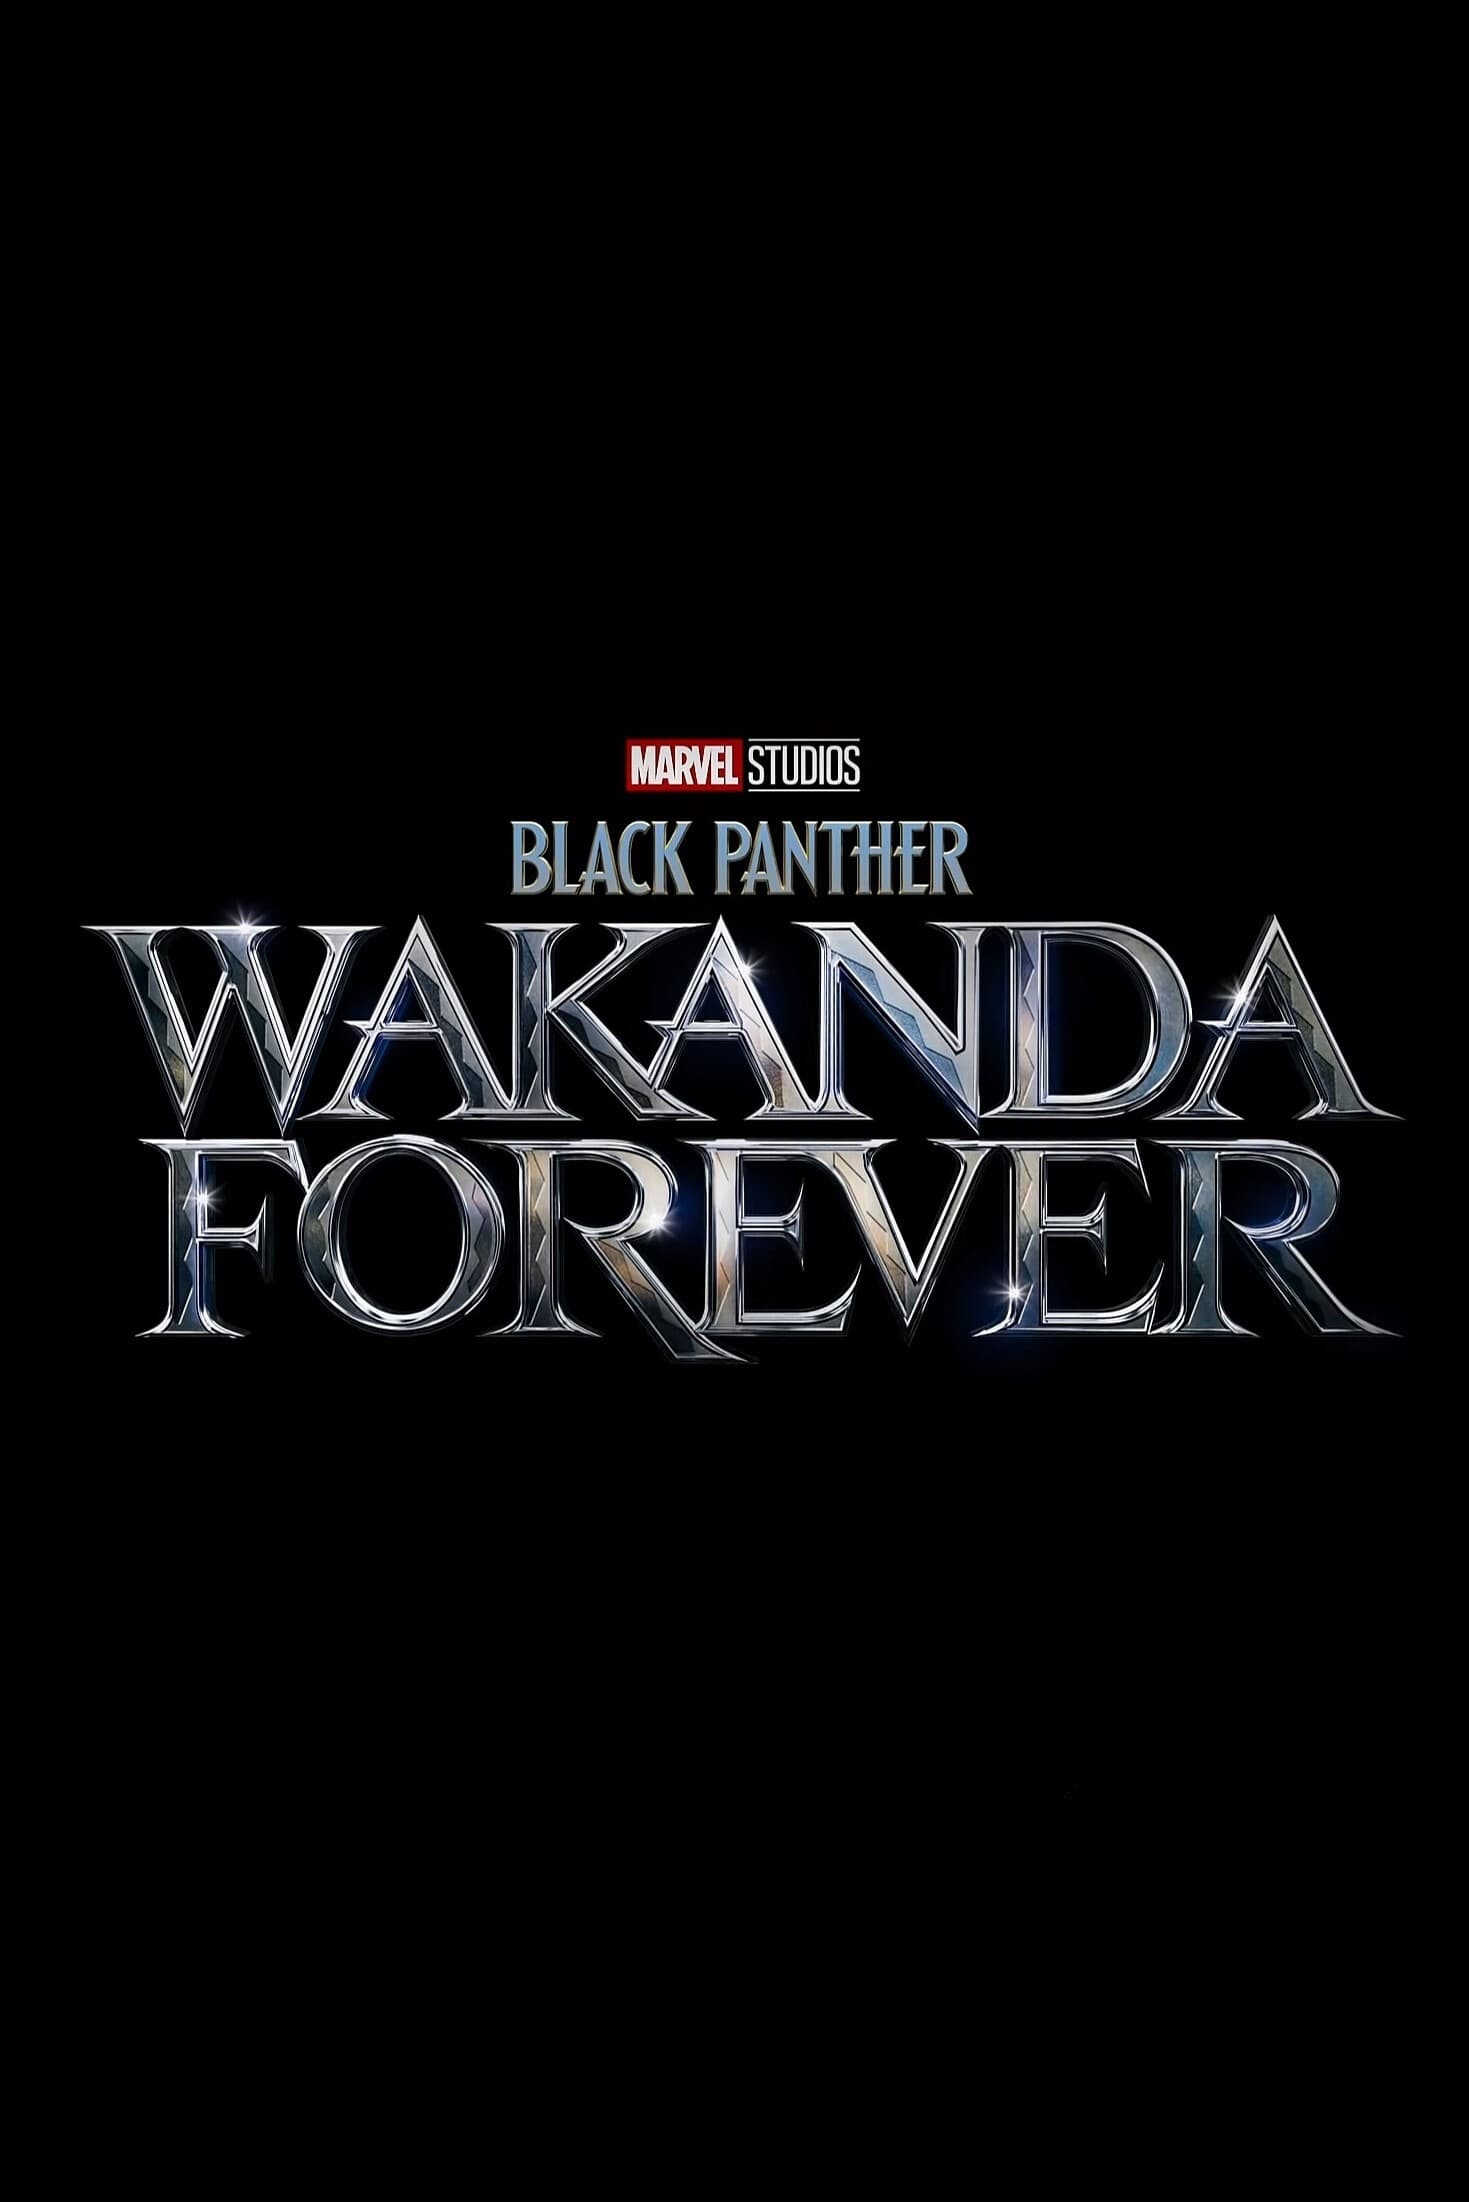 Poster for the movie "Black Panther: Wakanda Forever"